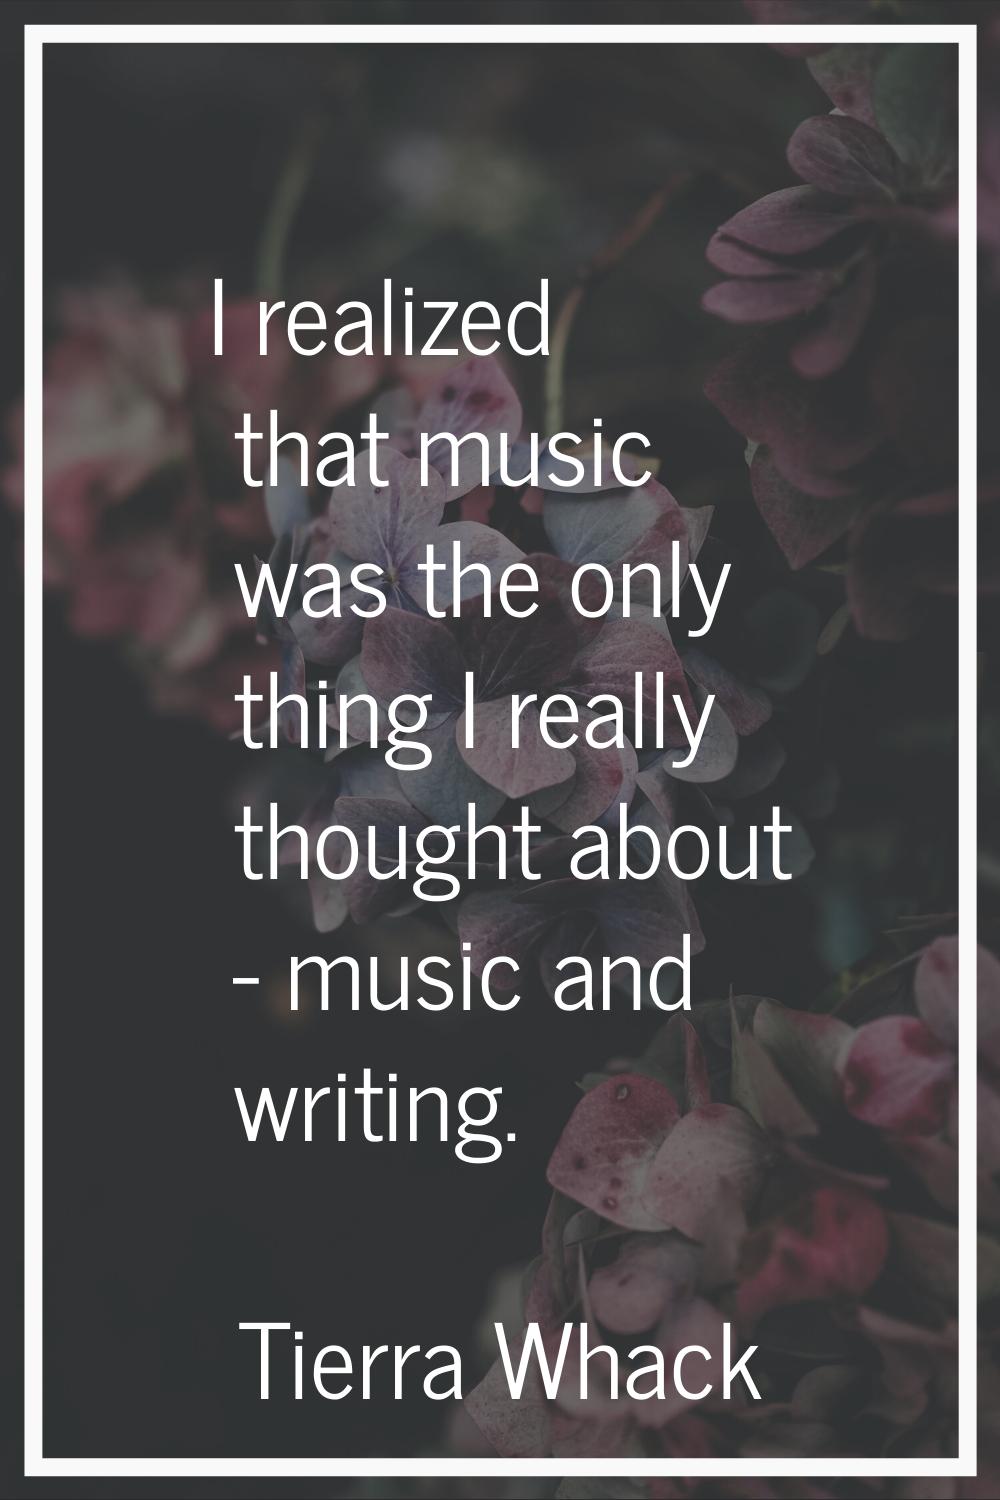 I realized that music was the only thing I really thought about - music and writing.